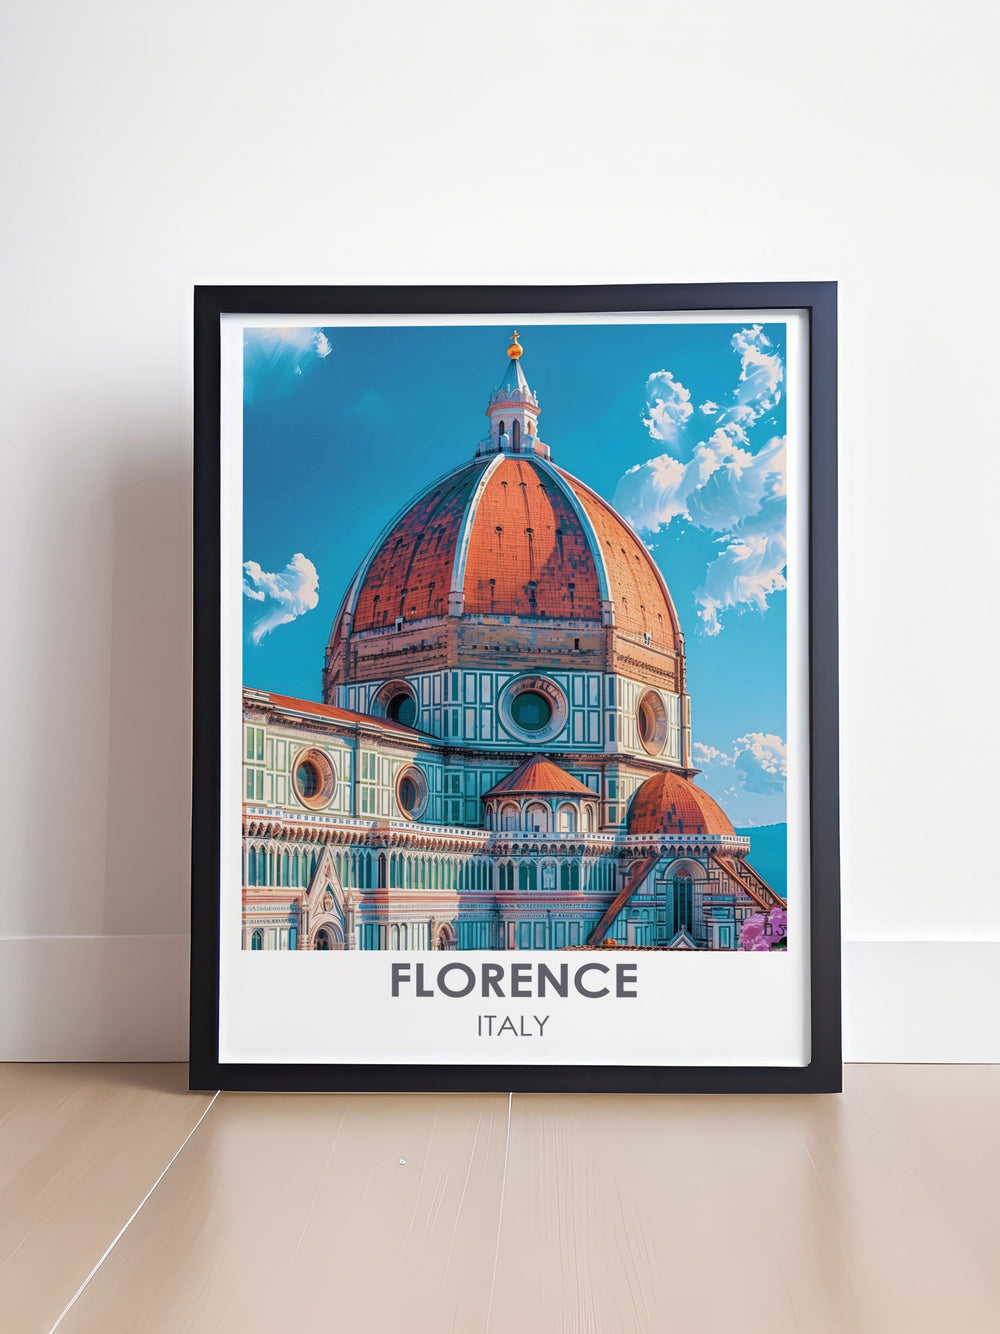 Custom print showcasing Florence Cathedral, providing a unique perspective on its architectural splendor.